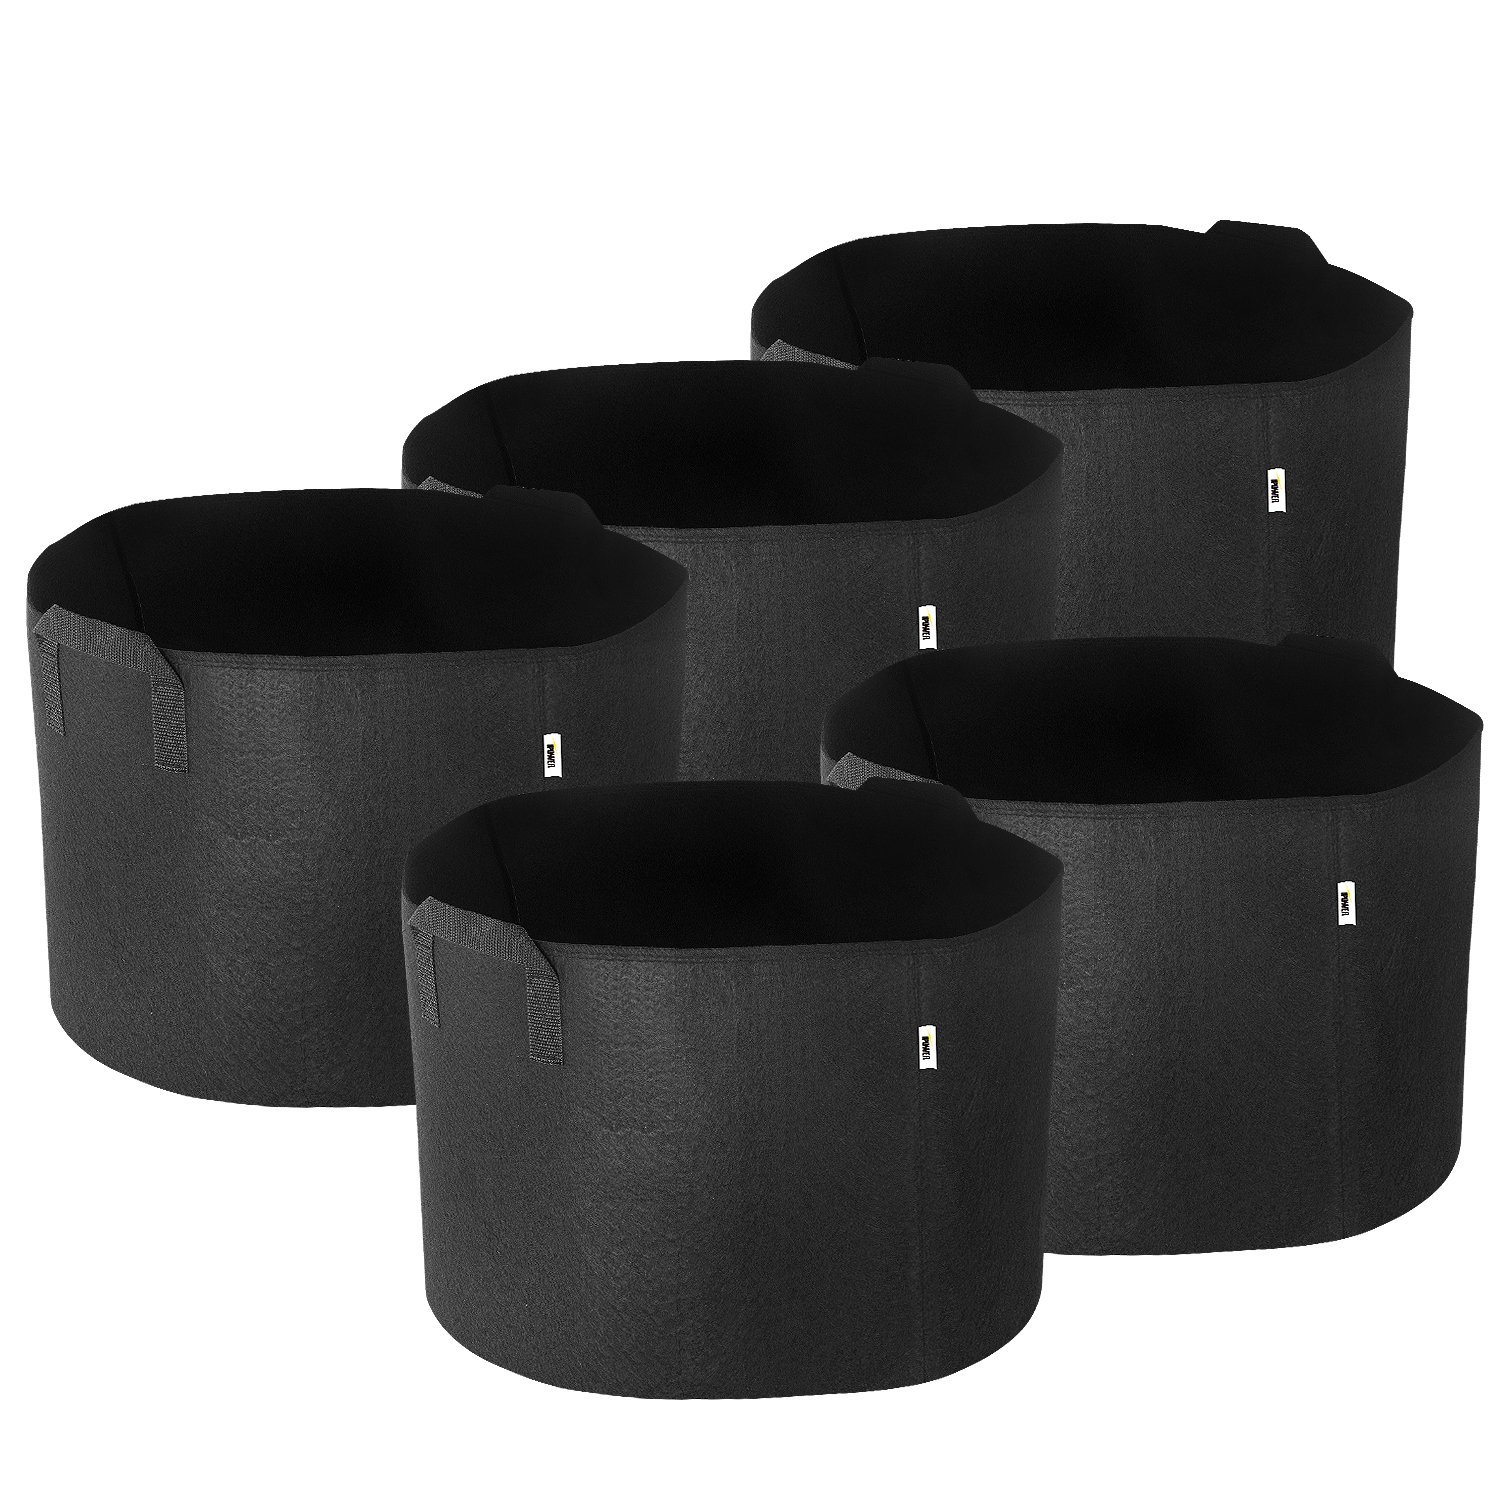 Leehoos 5-Pack 7 Gallon Grow Bags with Thickened Nonwoven Fabric Pots Container Black Breathable Fabric Pots for Healthier Plants Flowers Aeration Planters for Smart Gardening Heavy Duty Thick Container with Handles 